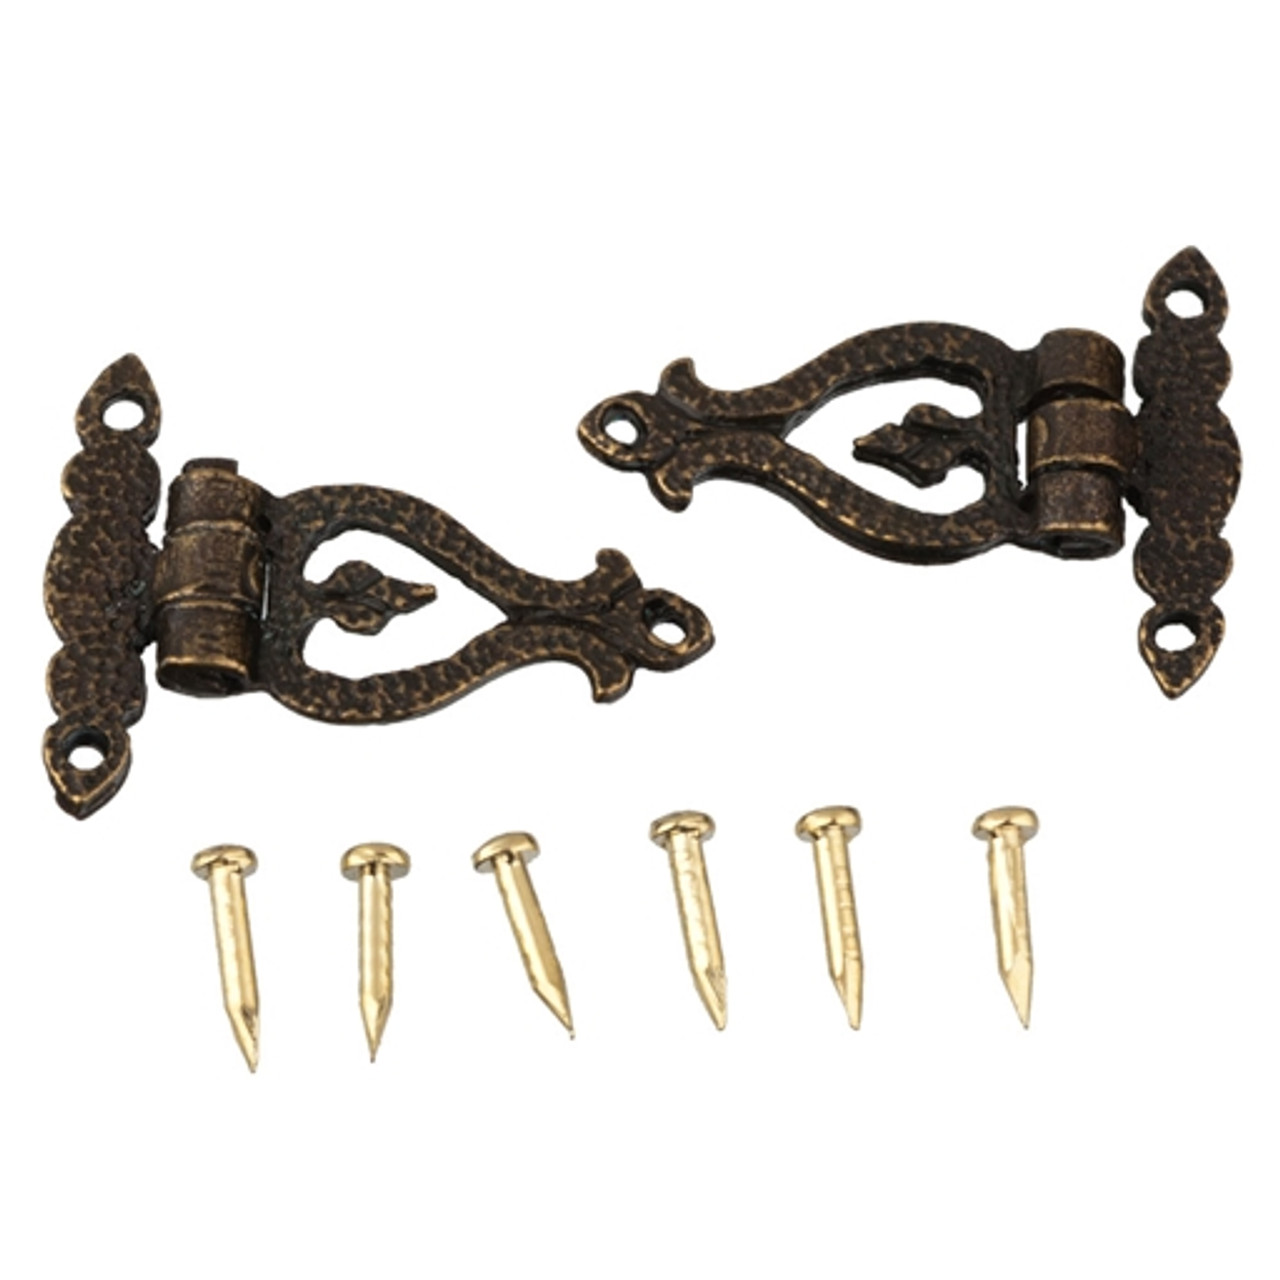 Pair of Small Decorative Strap Hinges with Nails